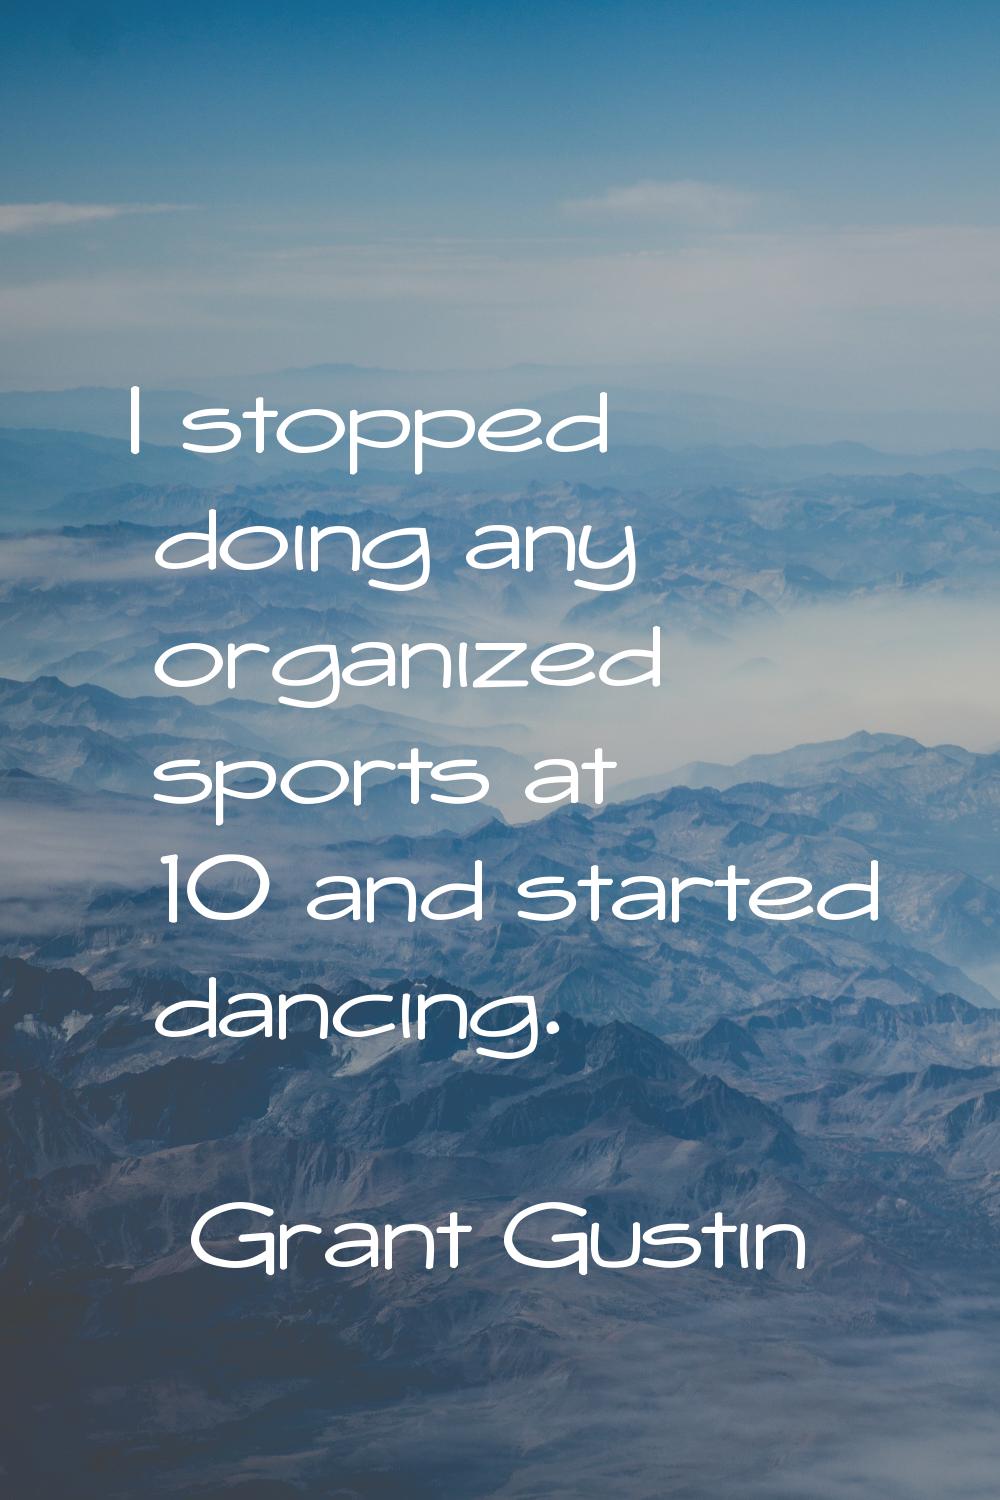 I stopped doing any organized sports at 10 and started dancing.